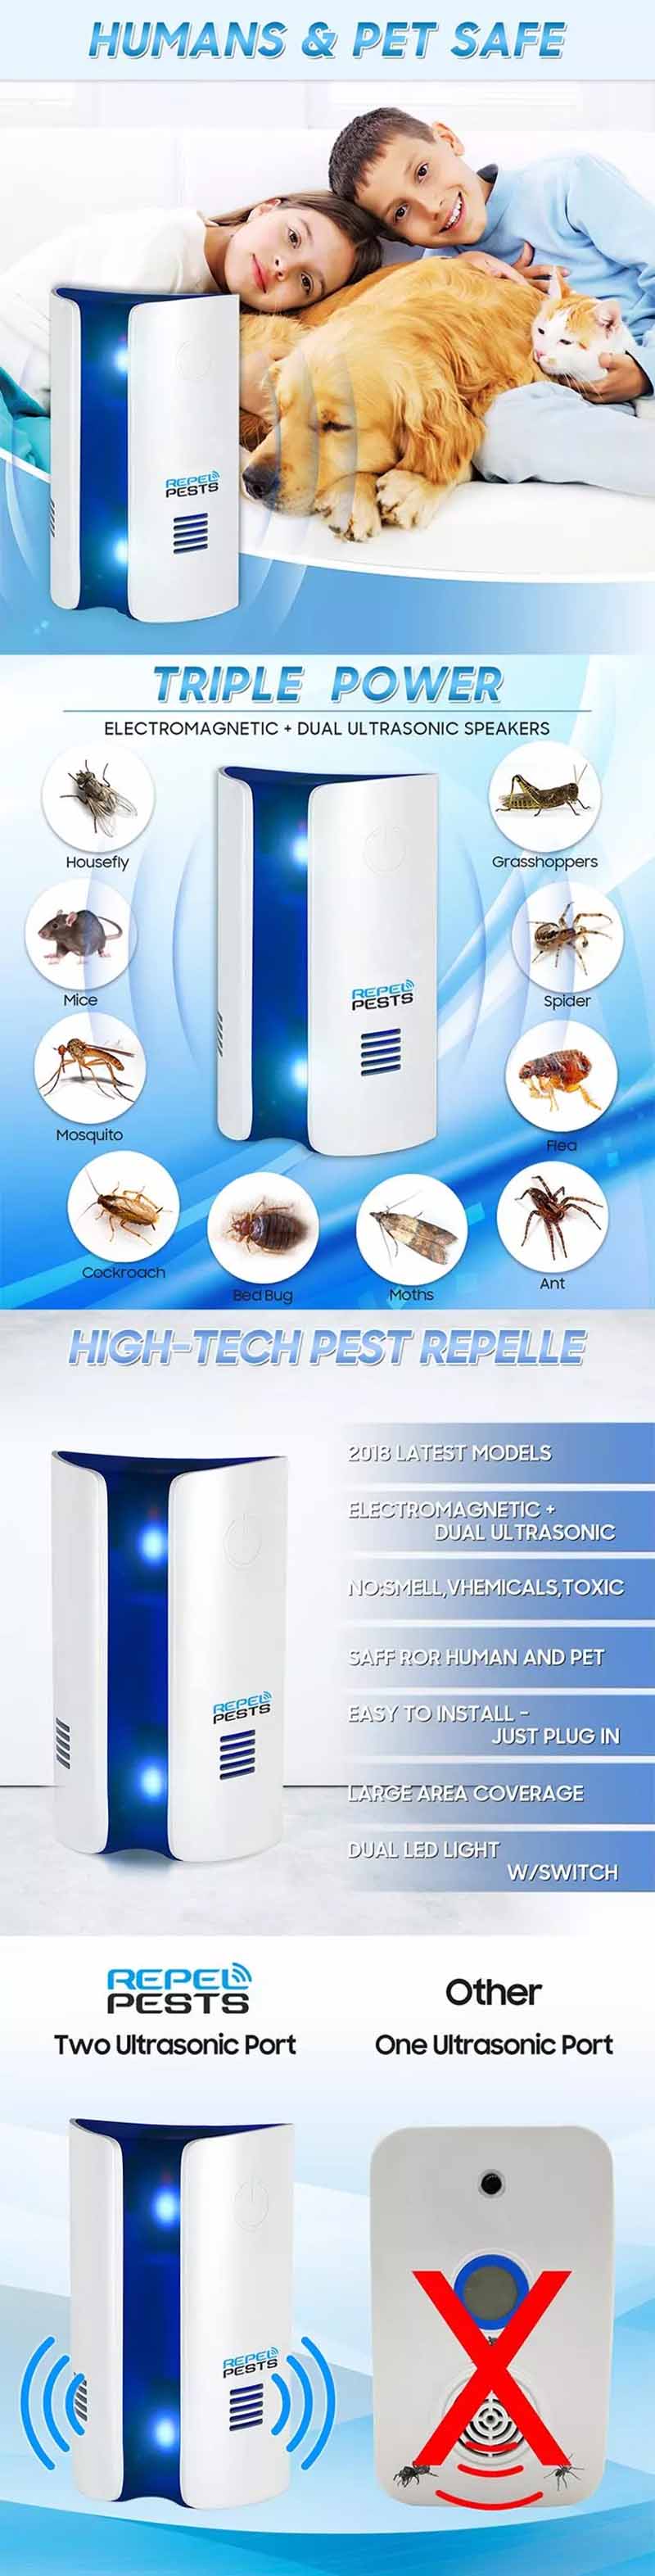 New Pest Control Ultrasonic Repeller Upgraded Electronic Indoor Pest Control with Night Light Repels Rodents and Insect2